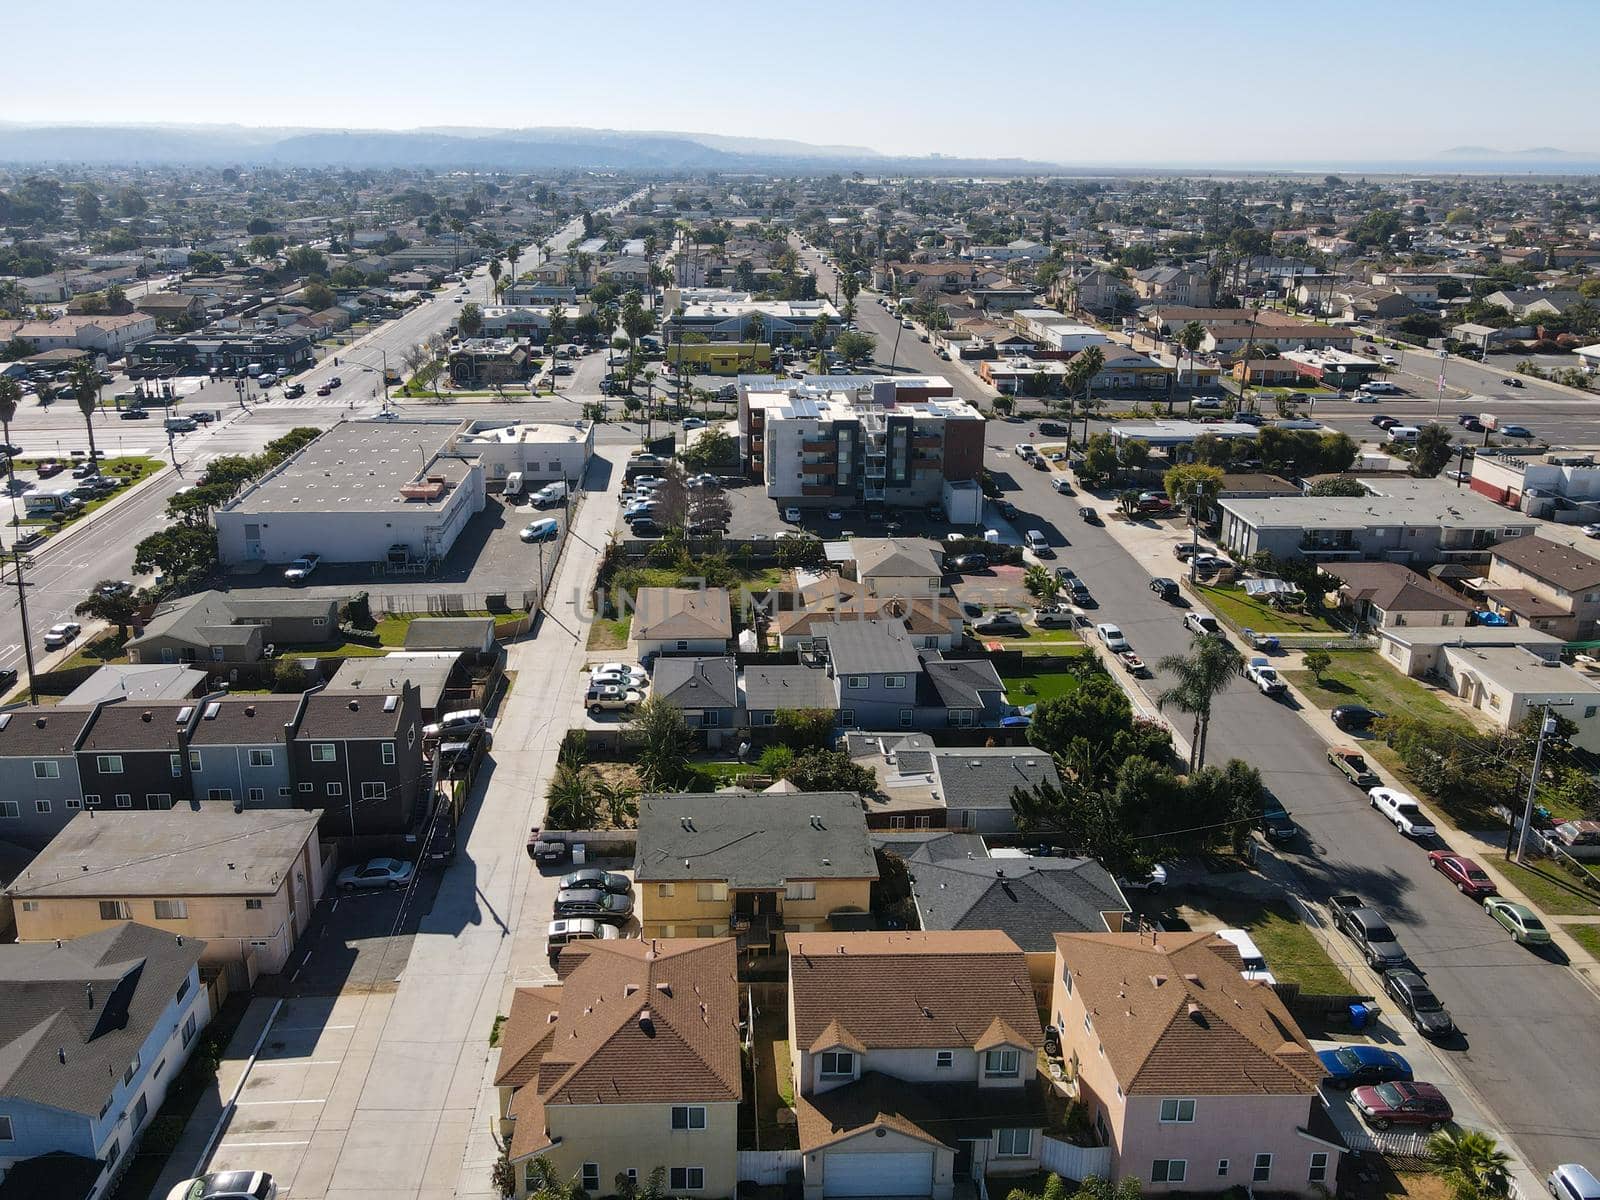 Aerial view of street and houses in Imperial Beach area in San Diego by Bonandbon